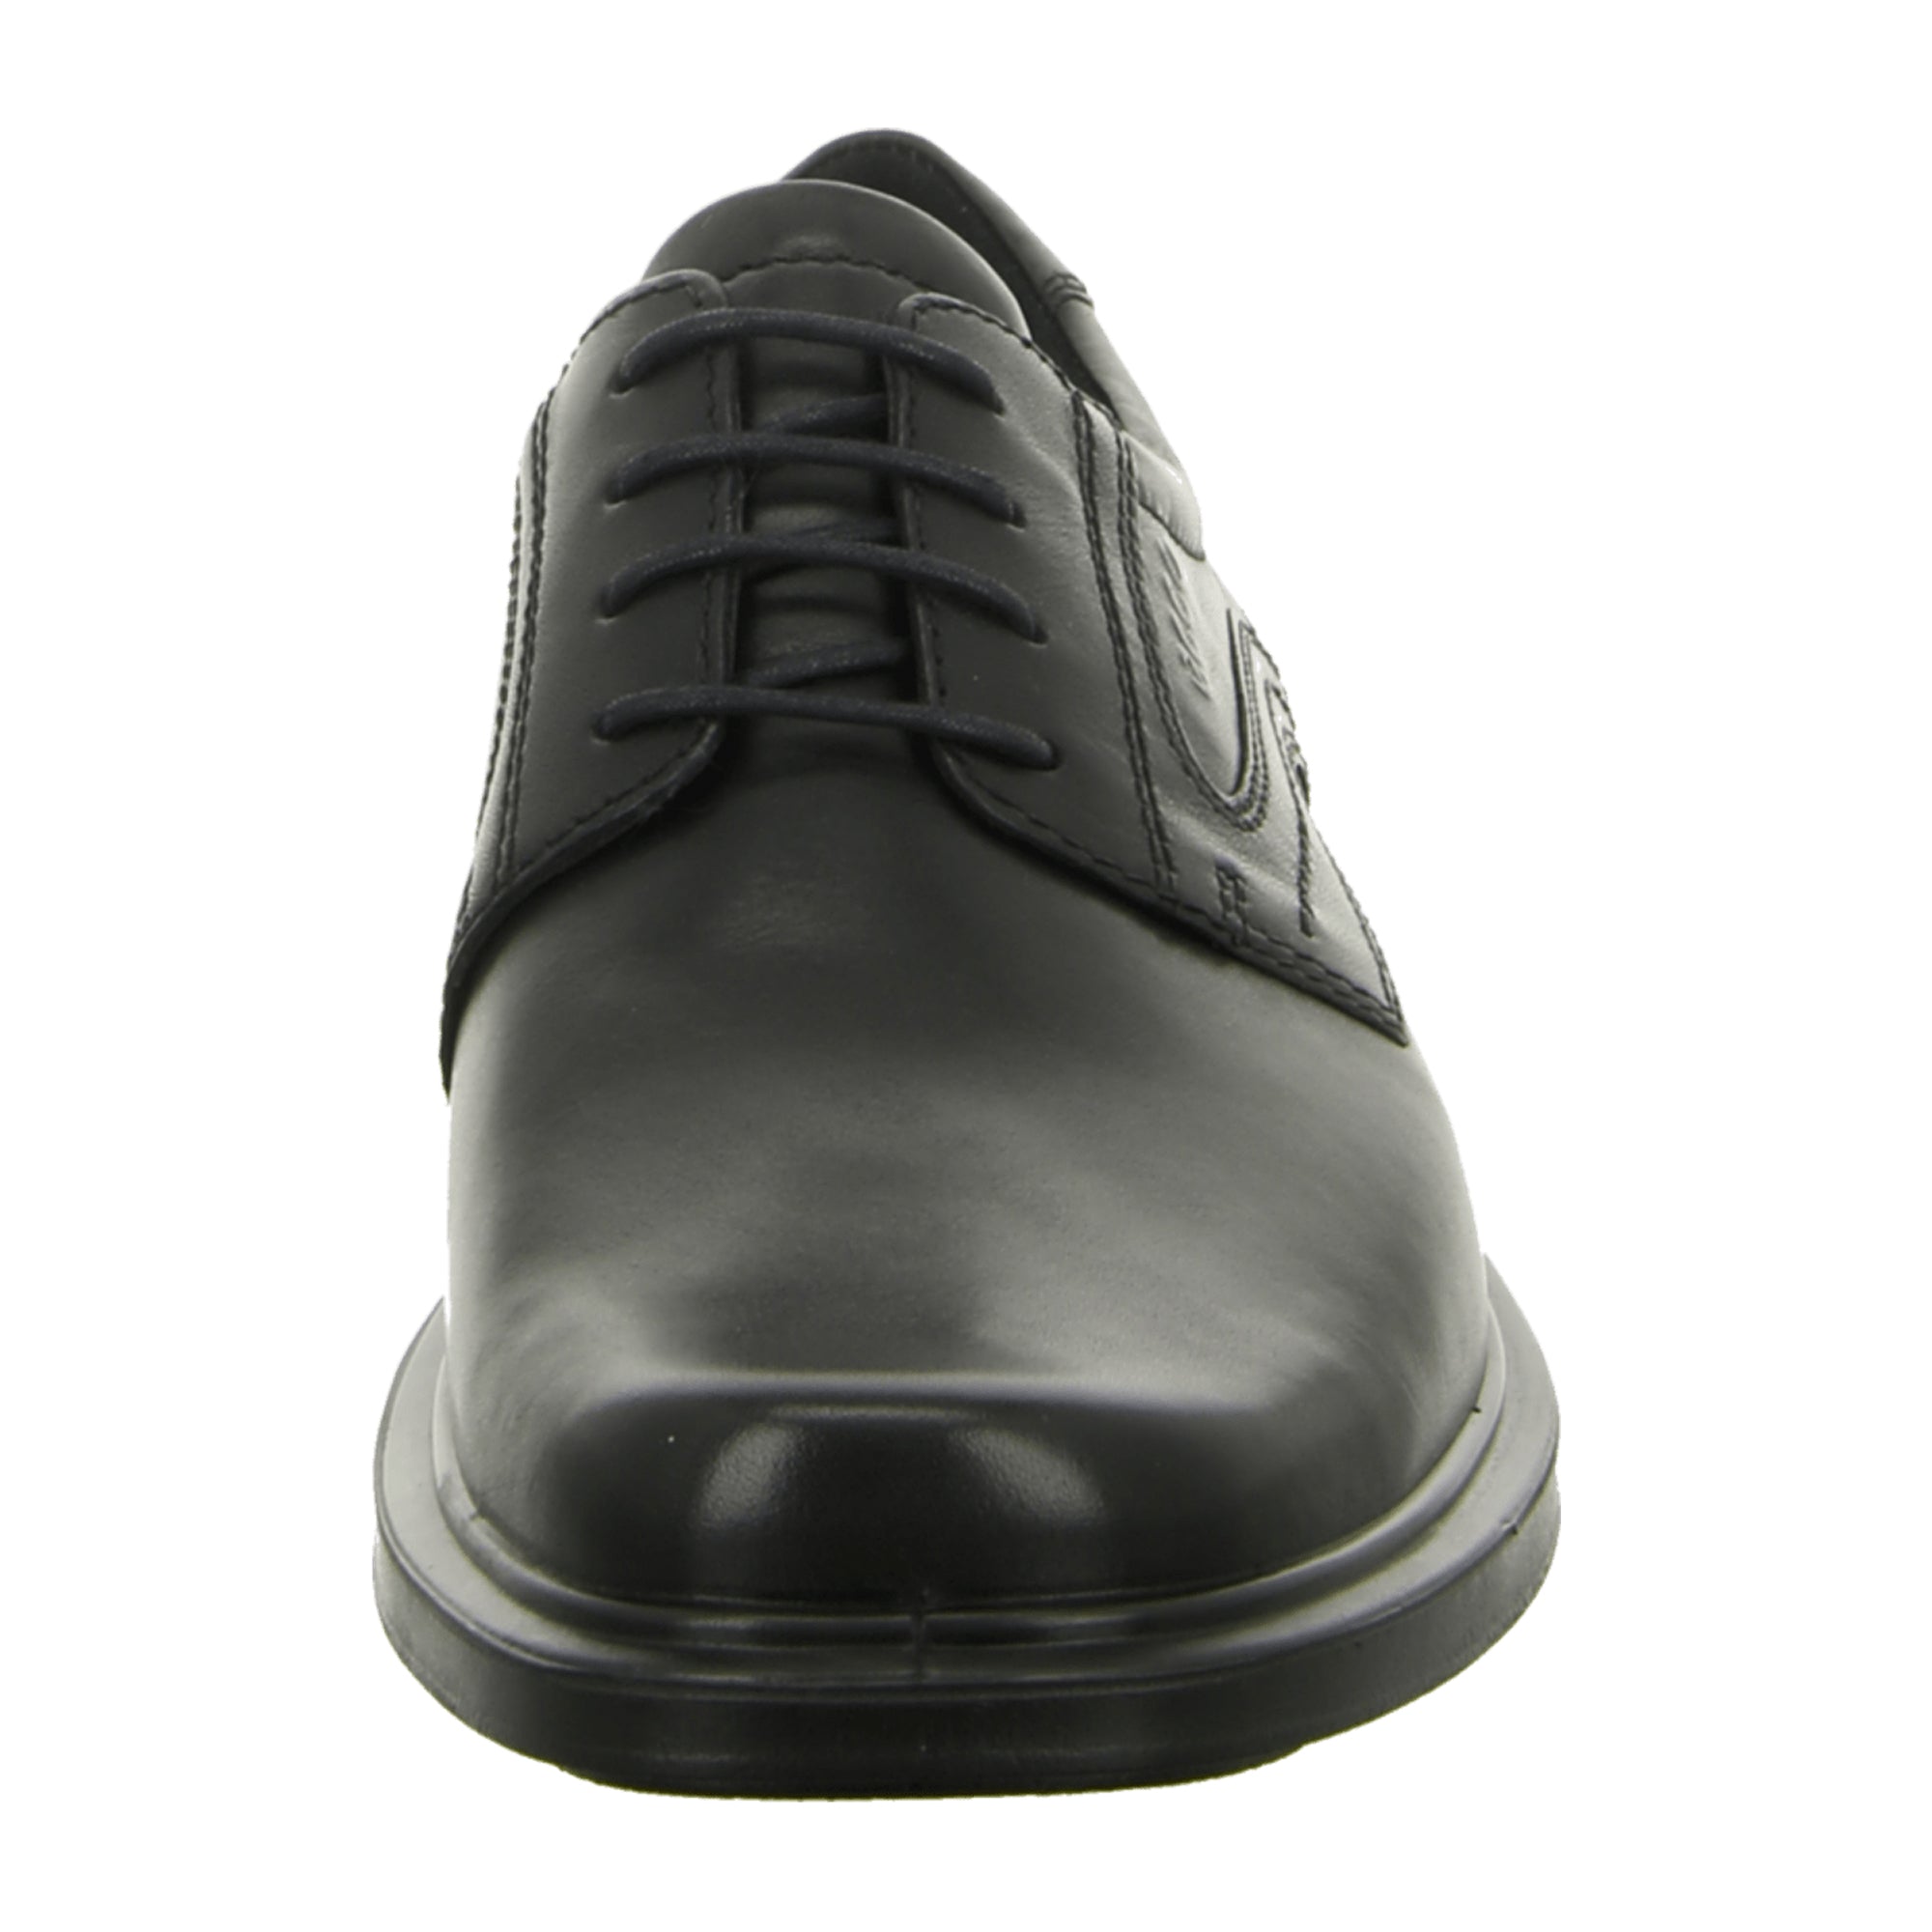 Ecco Helsinki Men's Black Leather Dress Shoes - Durable and Stylish